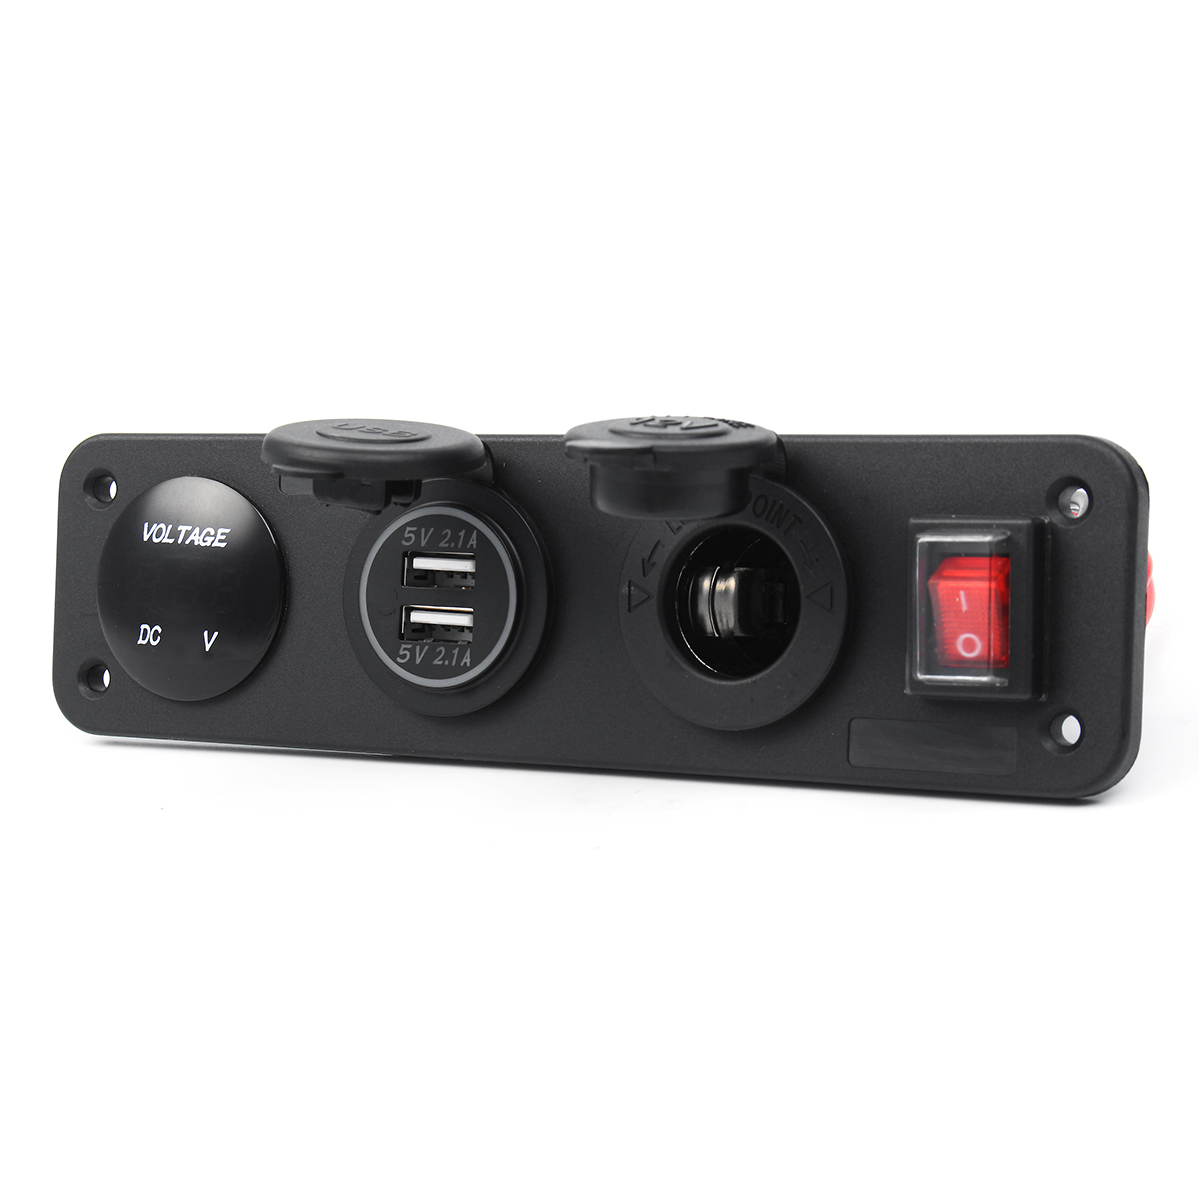 3-in-1-DC-12V-24V-Power-Outlet-Socket-Panel-Dual-USB-Phone-Charger-Switch-with-Volt-LED-Display-1311406-6